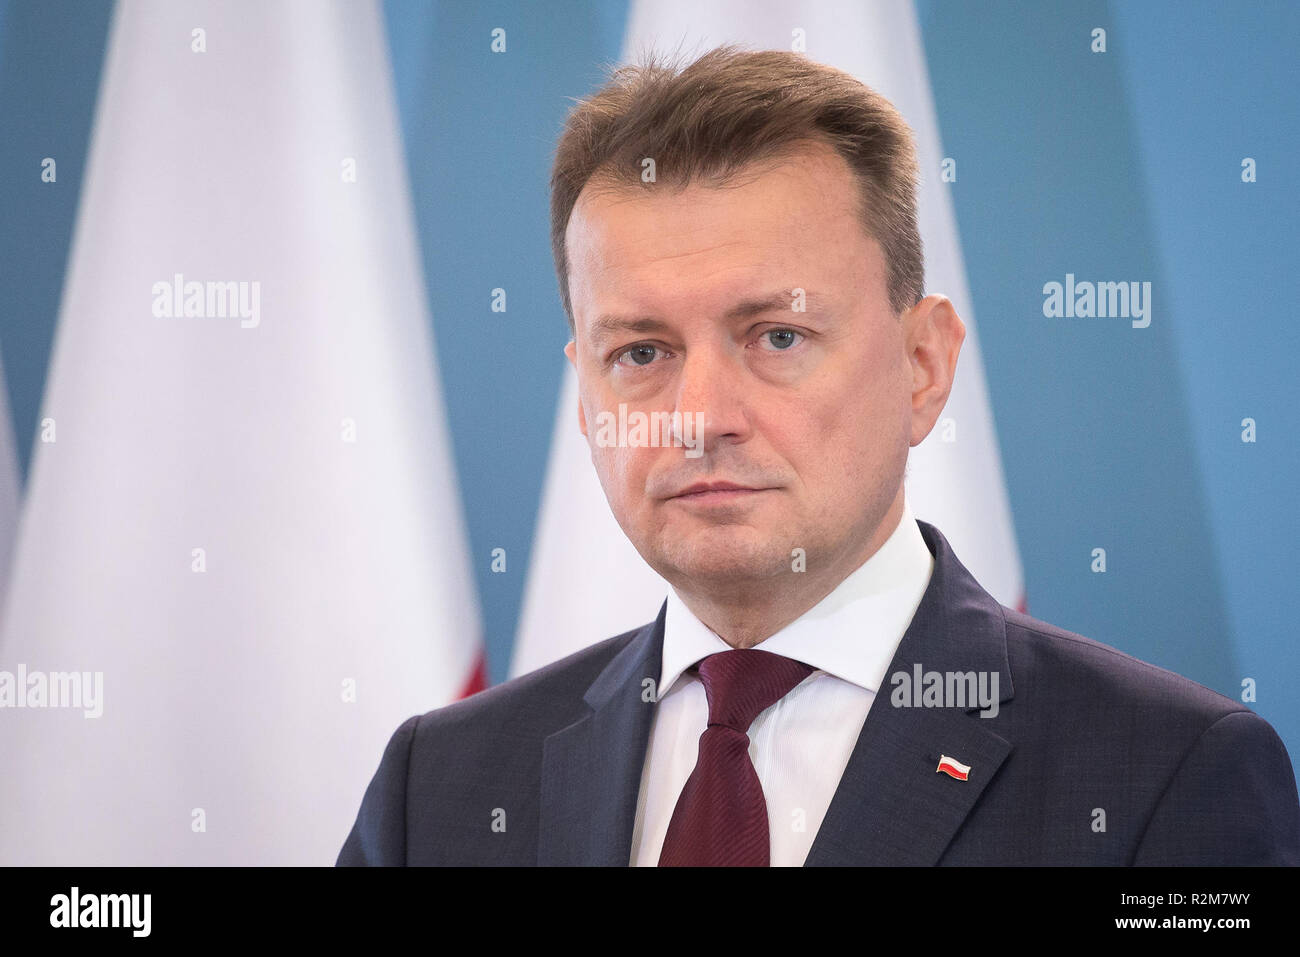 Polish Minister of the Interior and Administration Mariusz Blaszczak during the press conference about ransomware Petya cyberattack in Poland, at Chancellery of the Prime Minister in Warsaw, Poland on 28 June 2017 Stock Photo